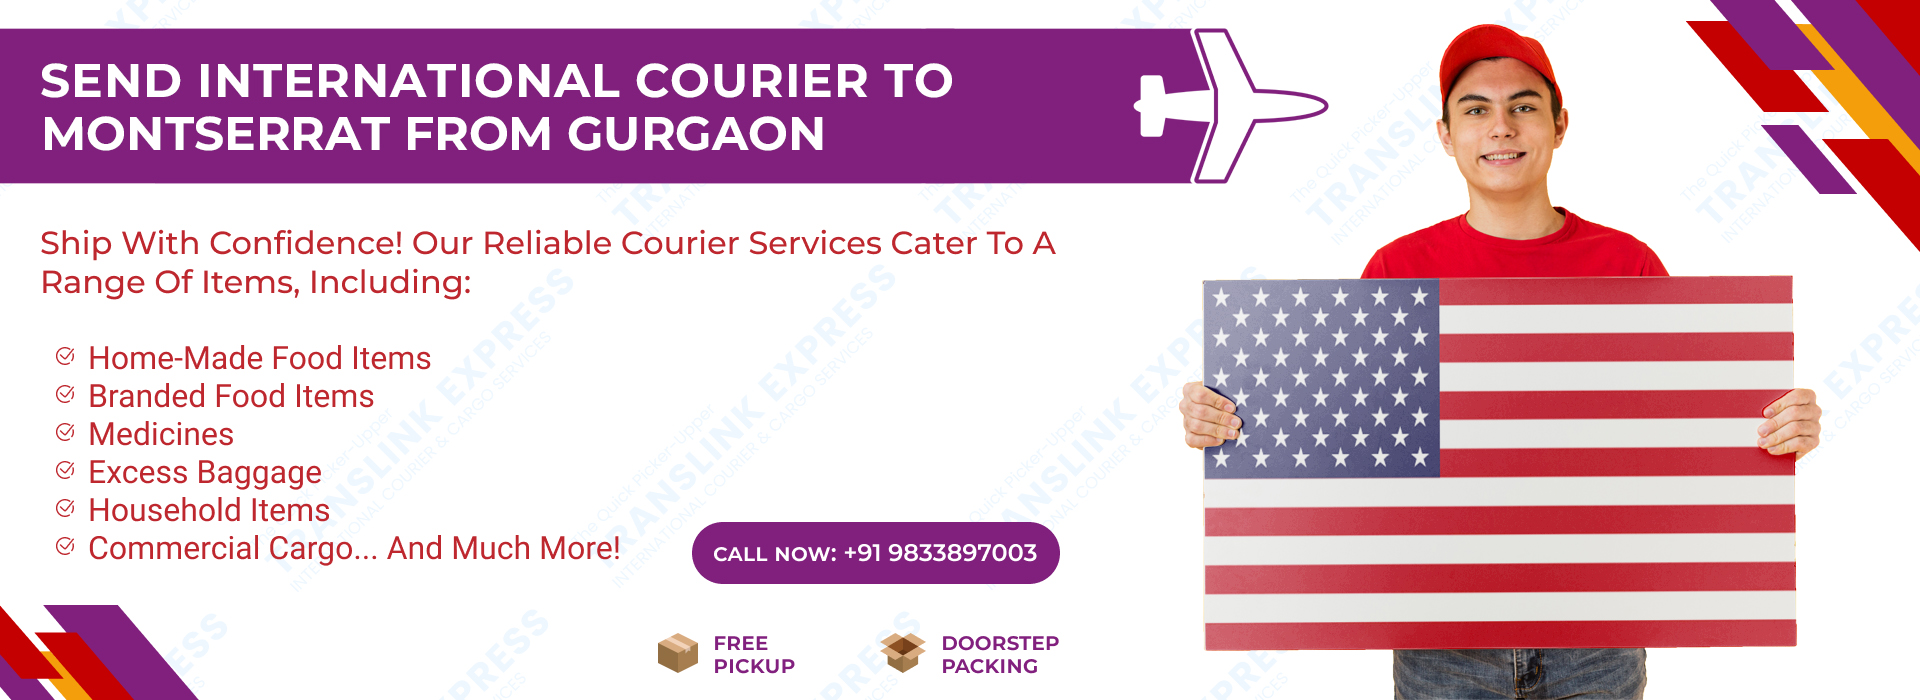 Courier to Montserrat From Gurgaon